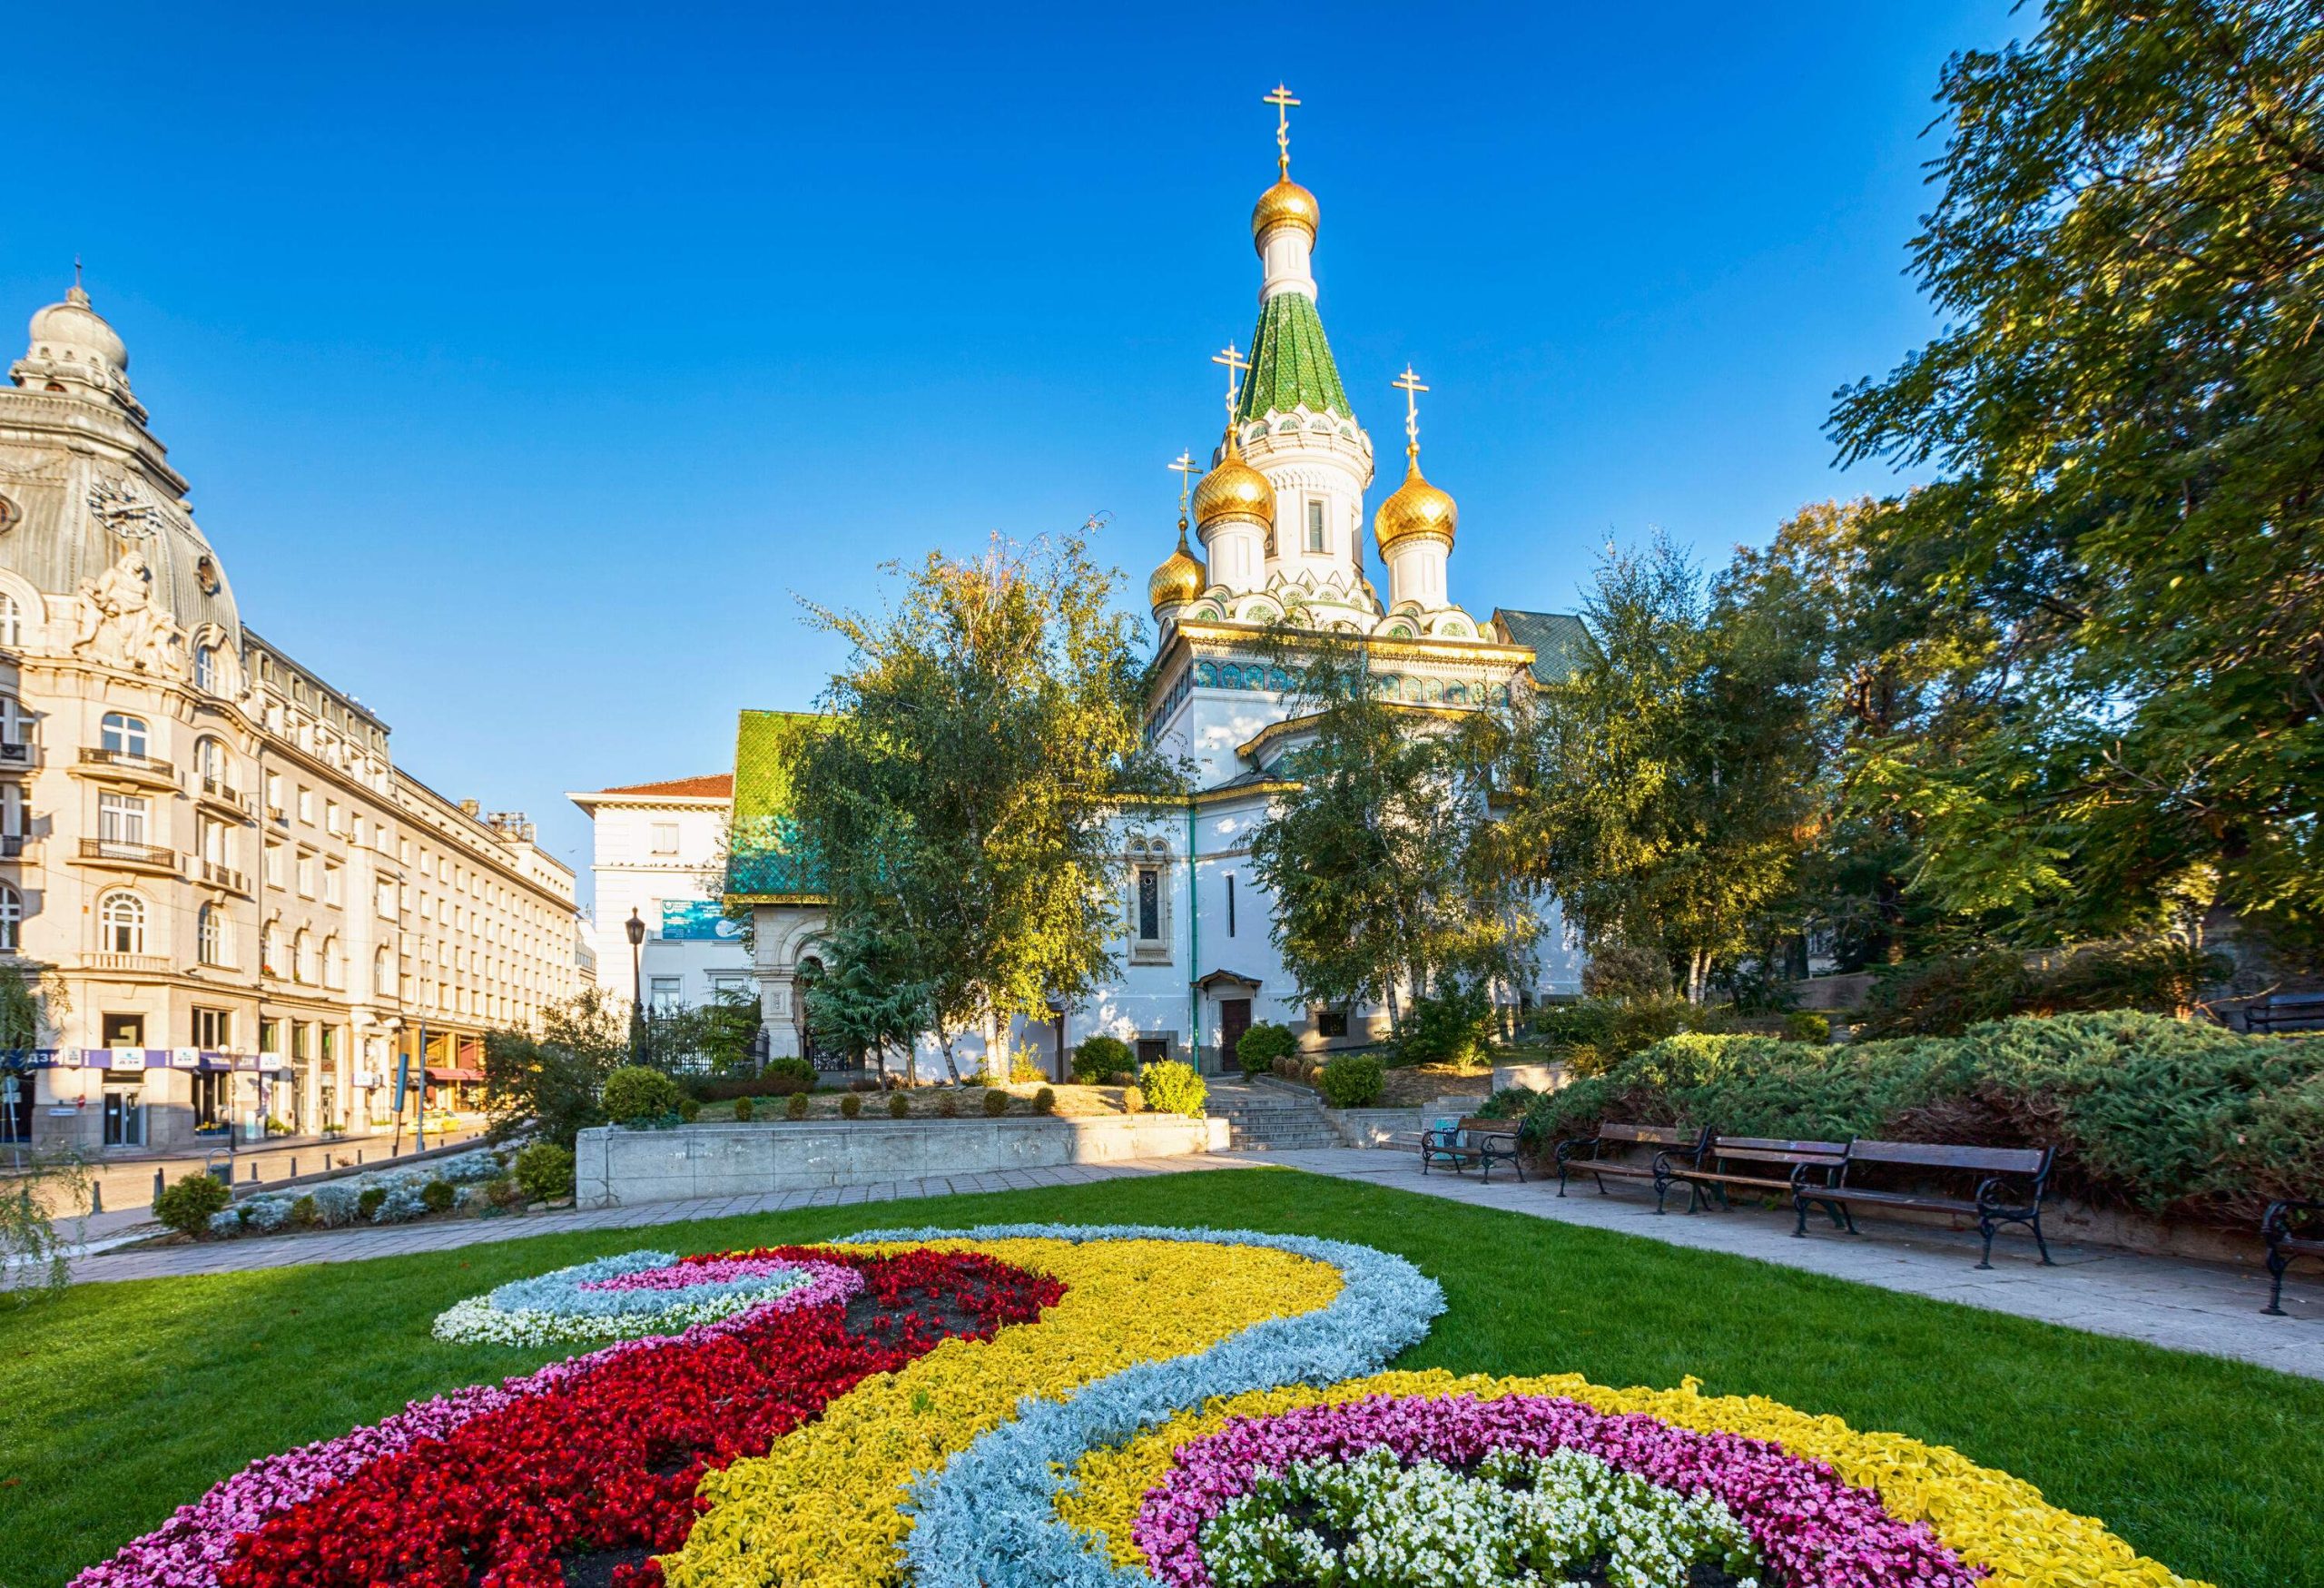 A beautiful landscape of colourful flowers in a park in front of a Russian Orthodox church.